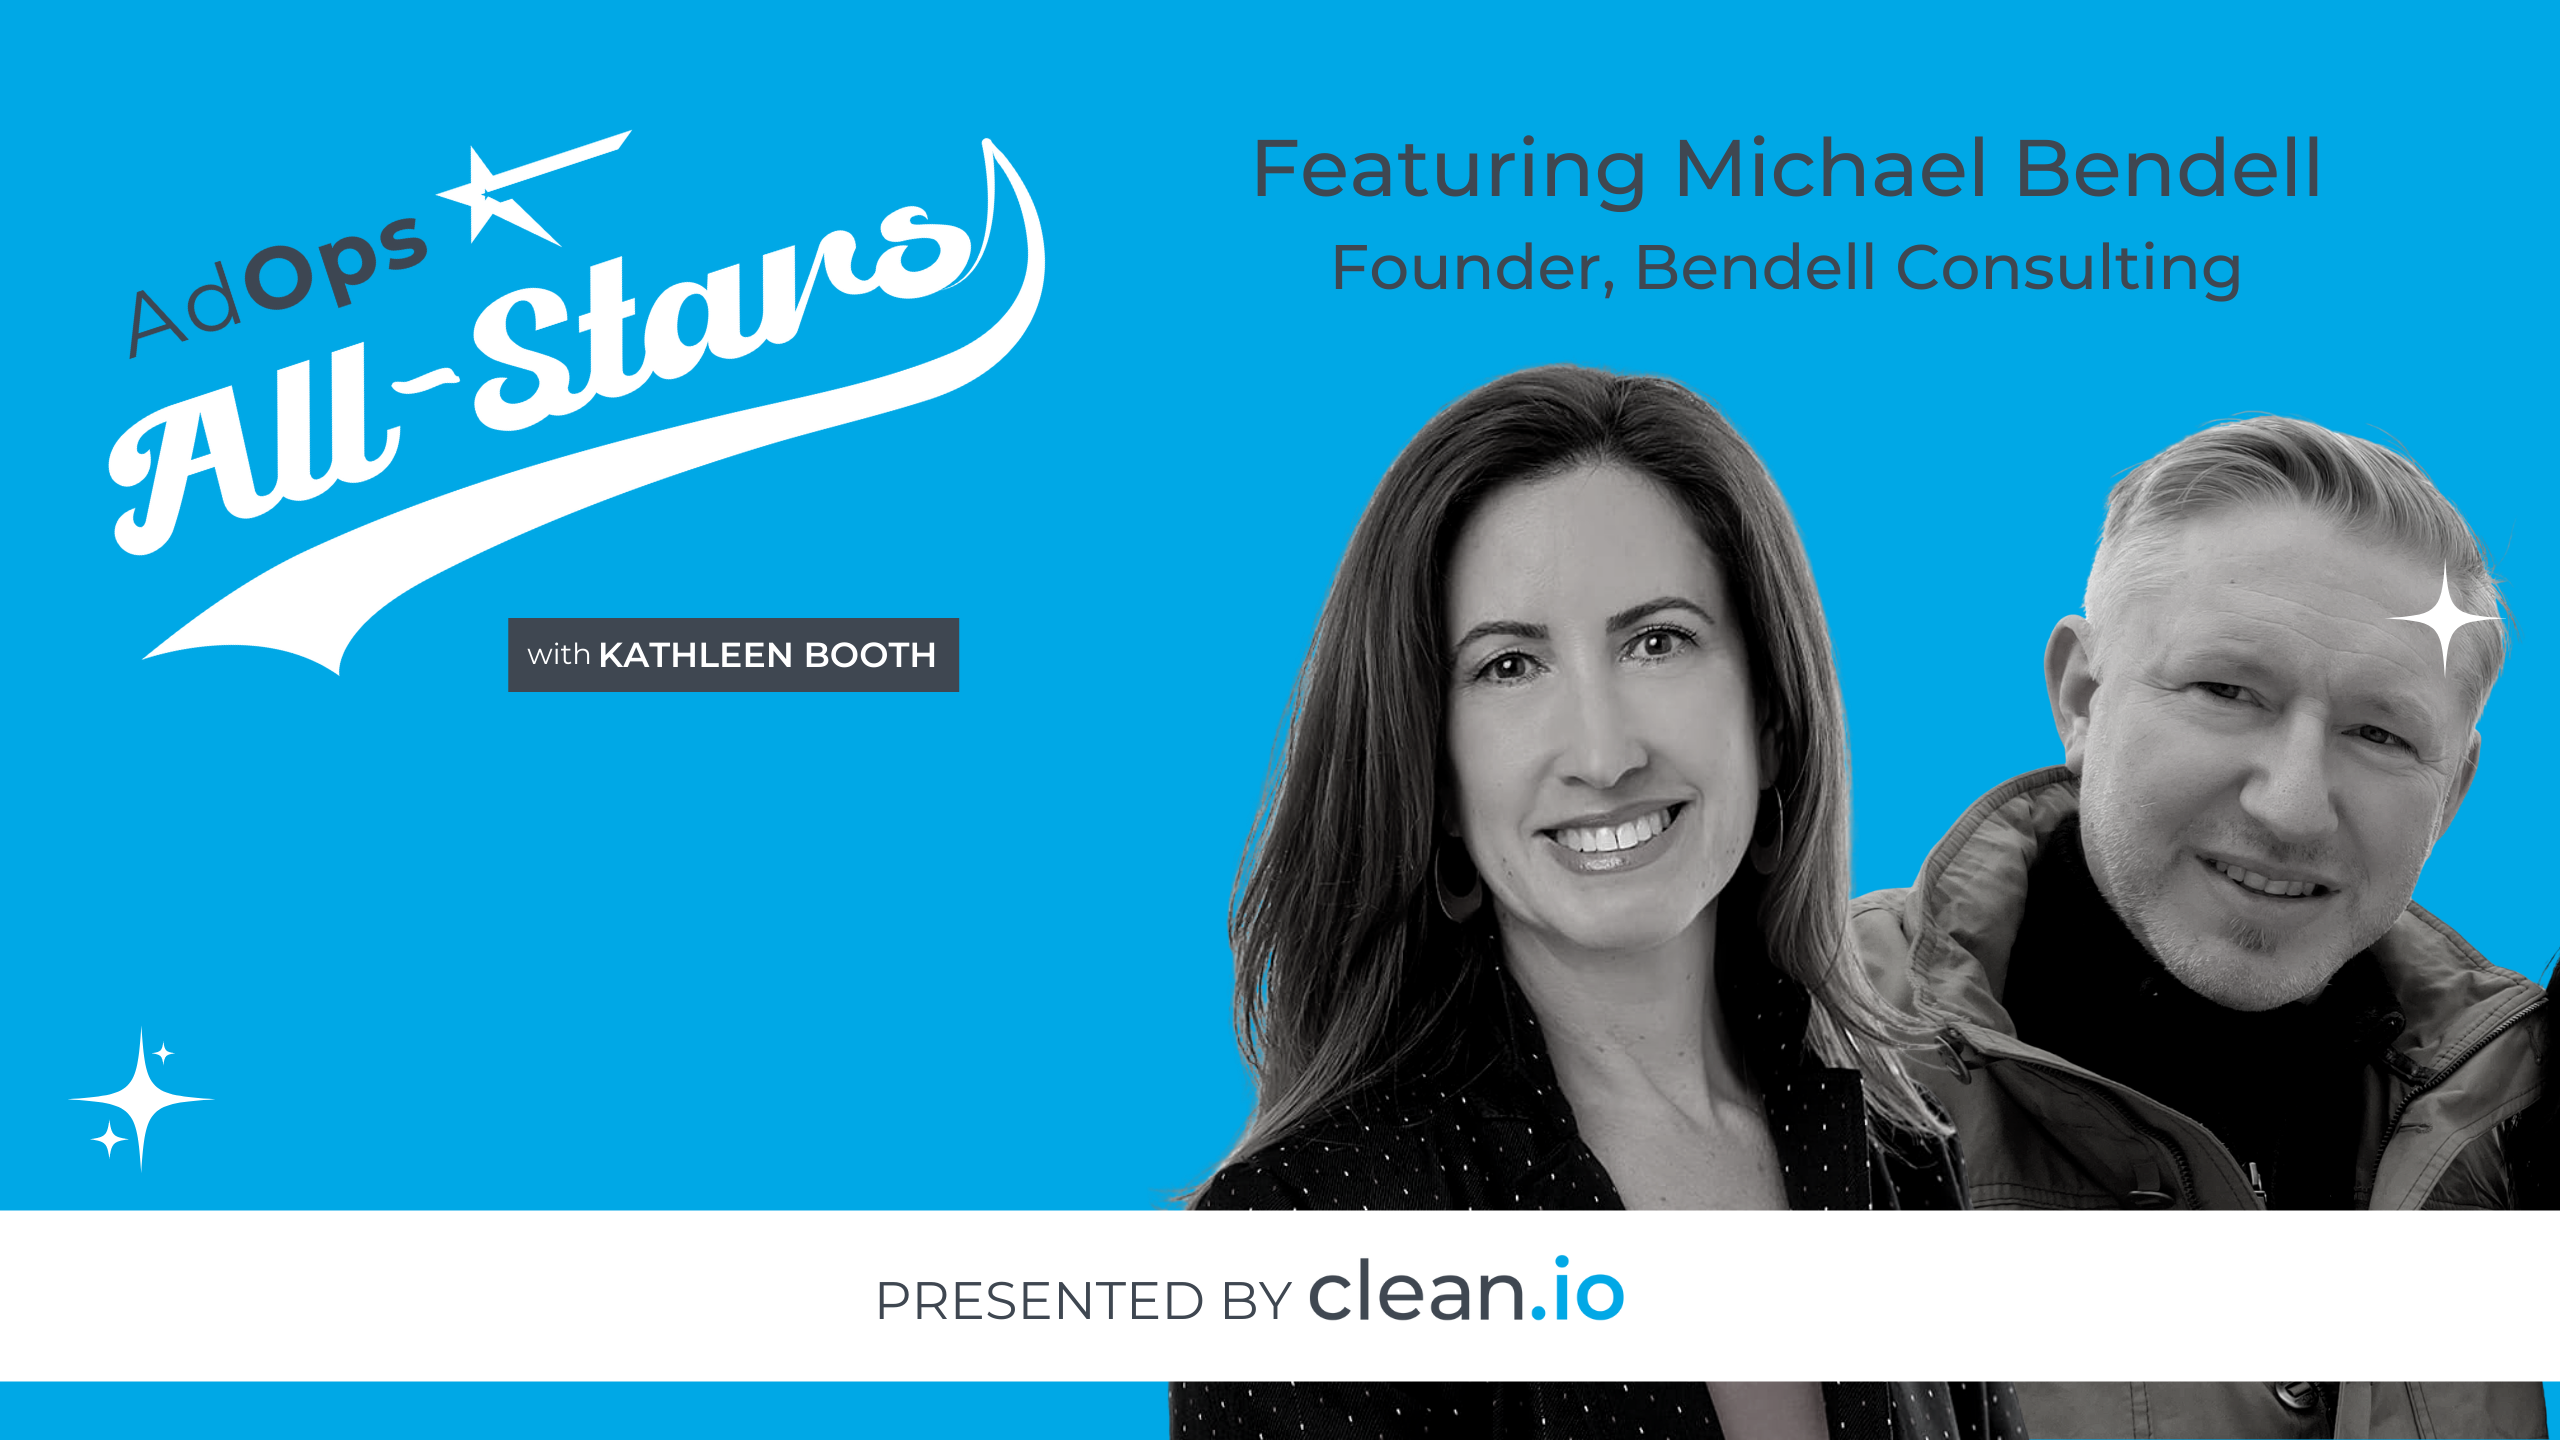 Ad Ops All Stars: Michael Bendell, Bendell Consulting